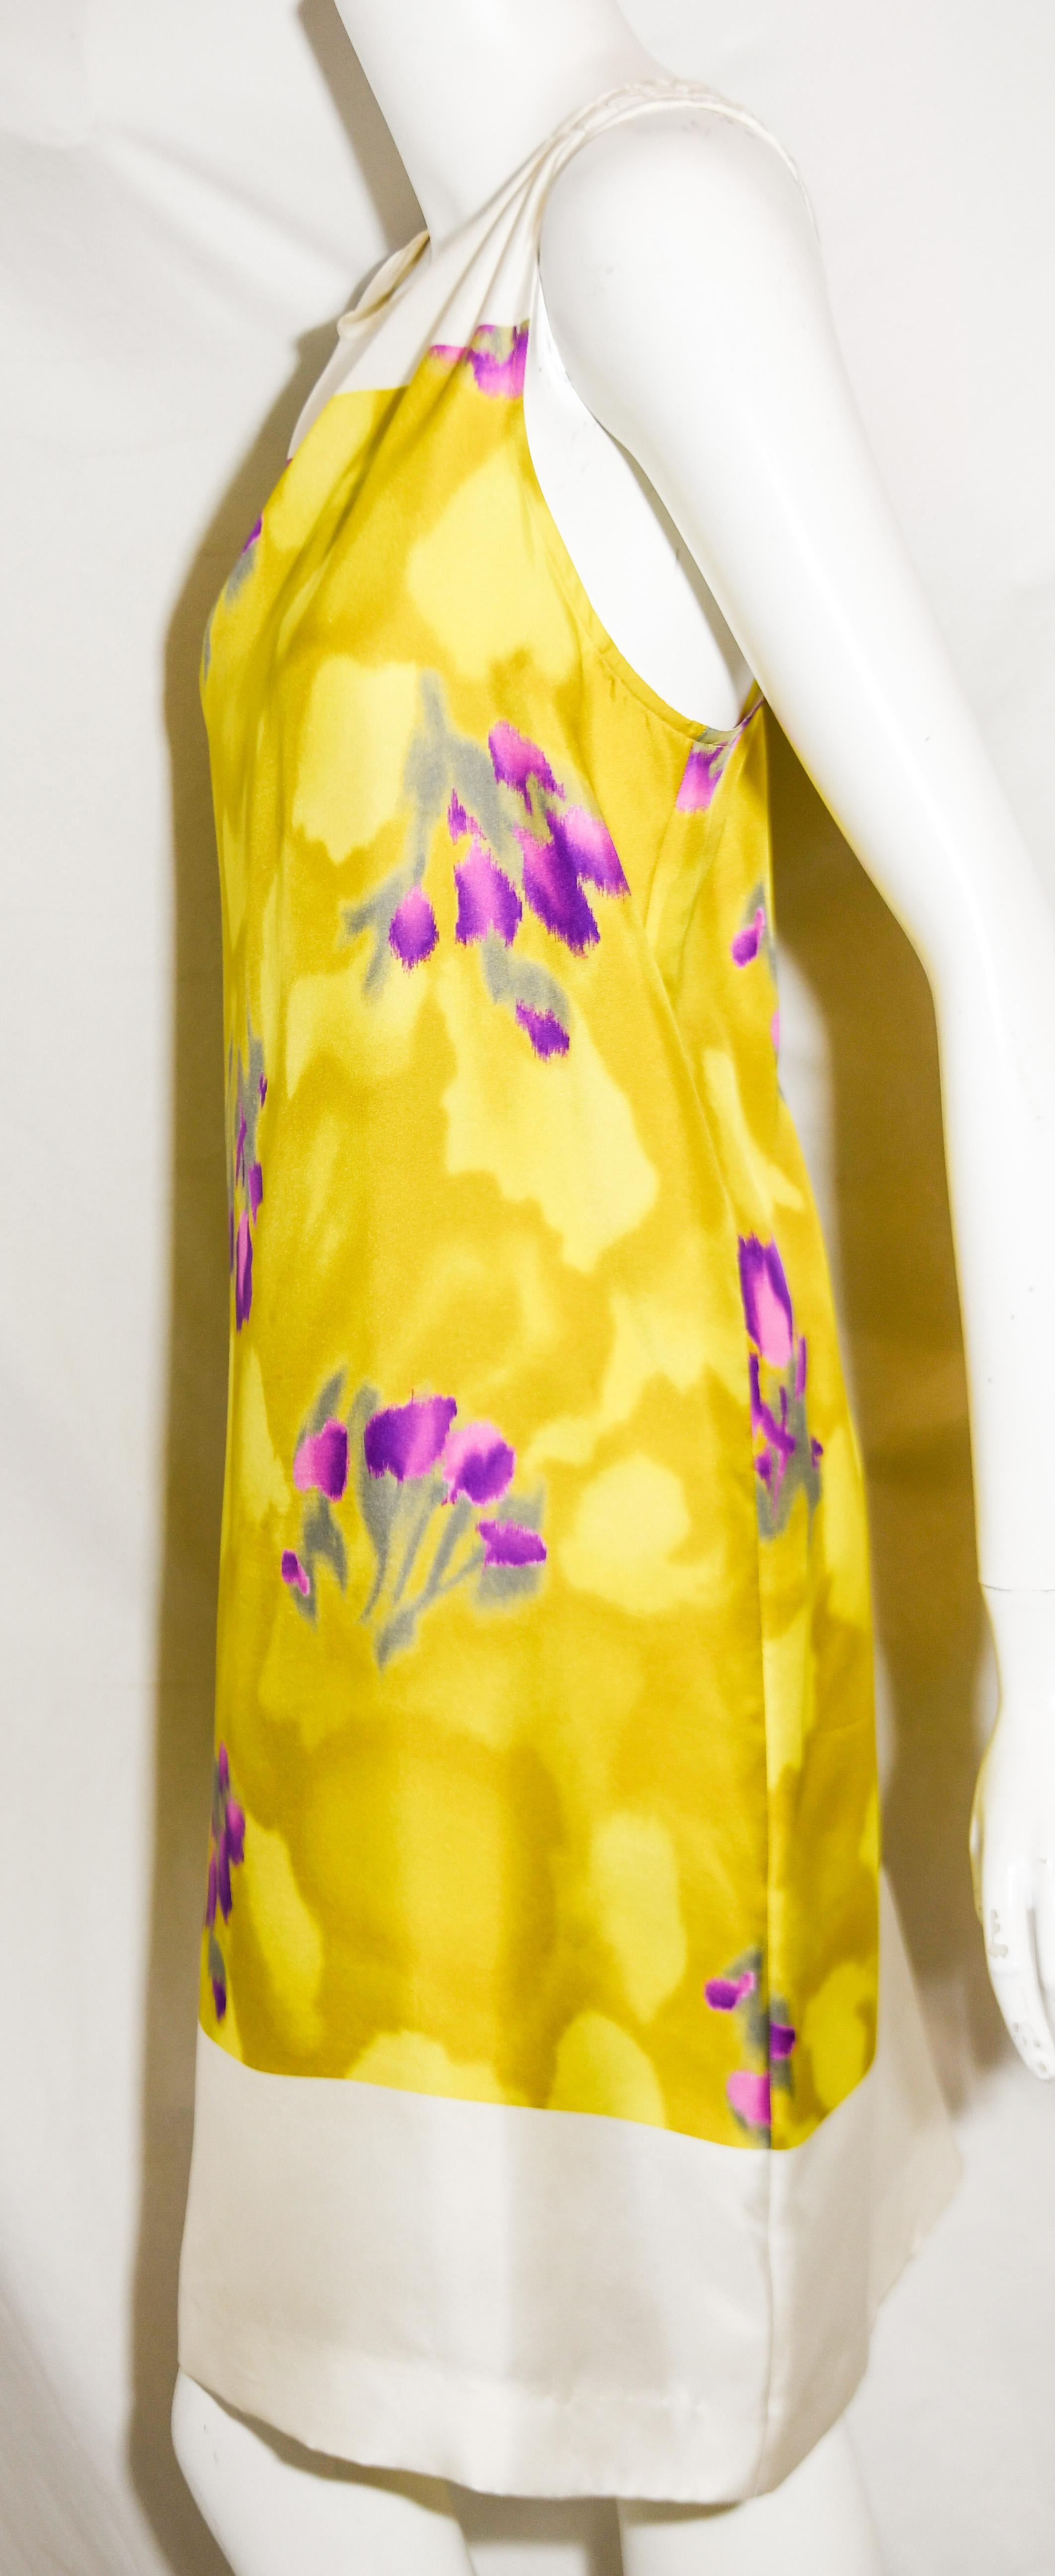 Dries Van Noten white and yellow floral dress includes a round neckline and in the color block style to the bust, also, at the hem, in white silk.  This dress is lined in white silk.   For closure, a zipper at back.  Dress is in excellent condition.